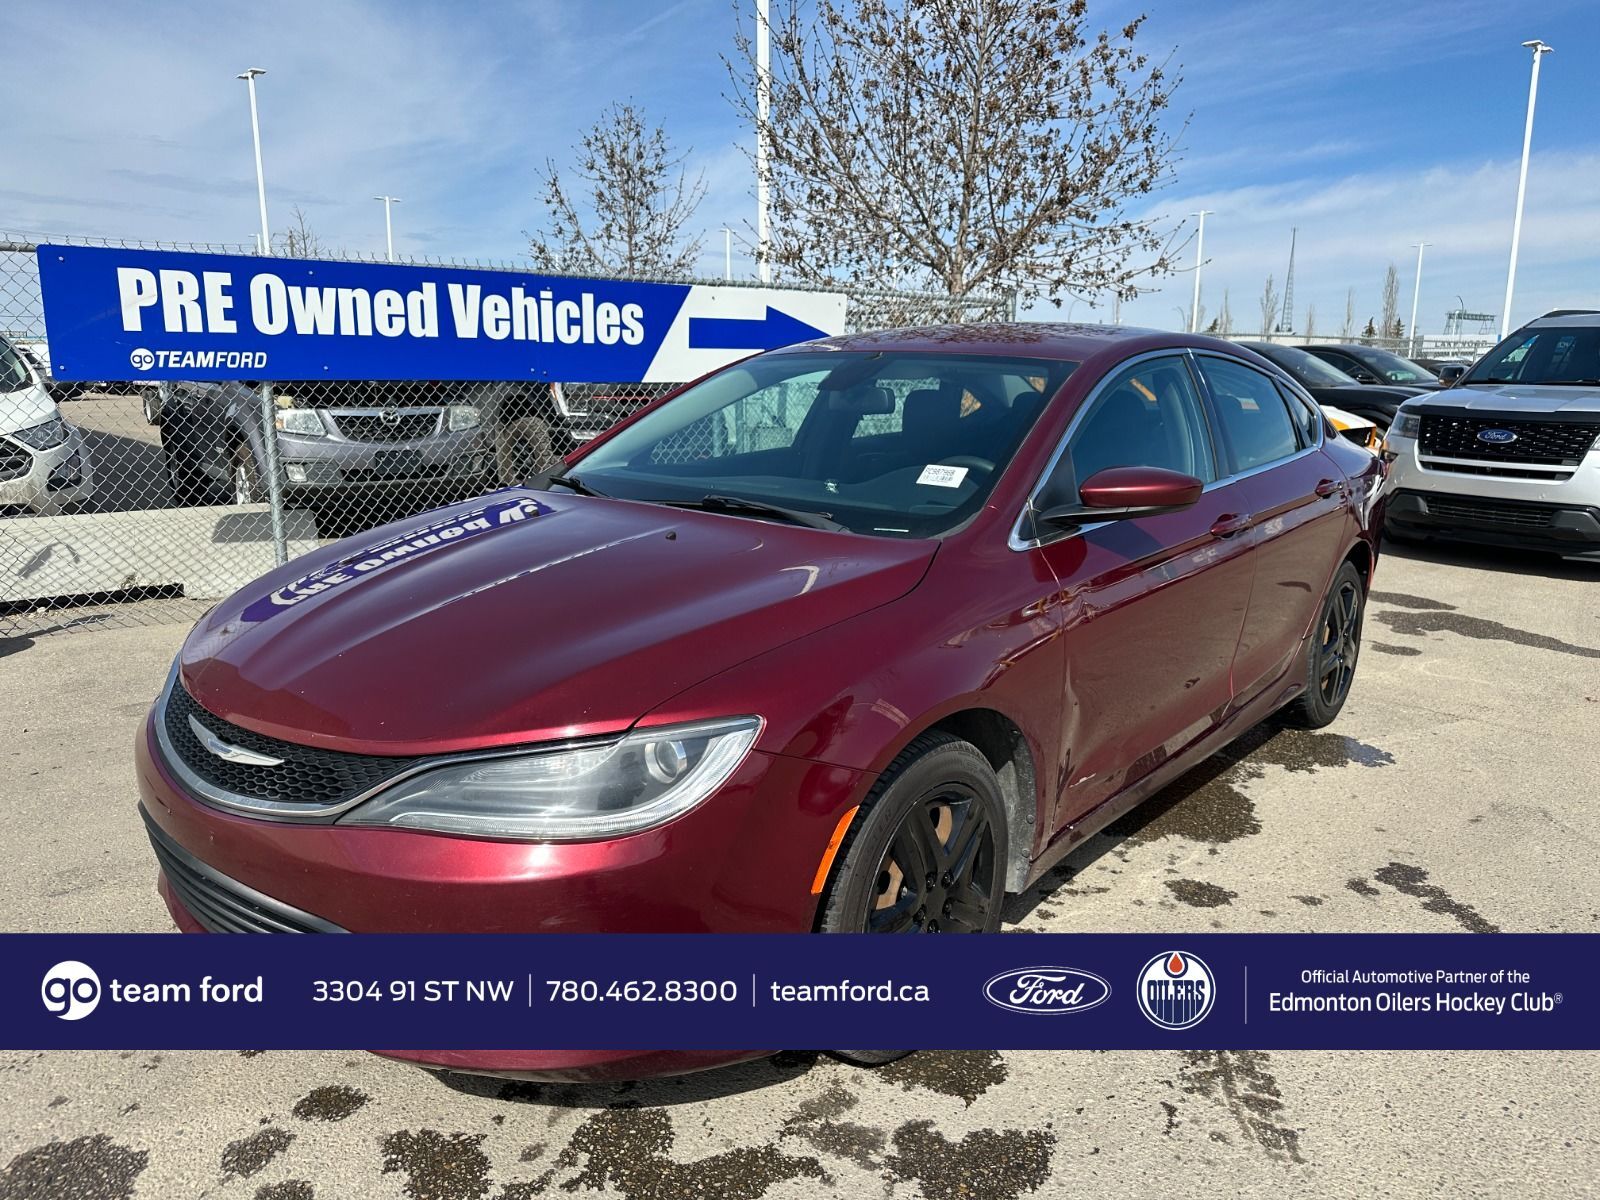 2015 Chrysler 200 LX- CLOTH, FWD, POWER OPTIONS AND MUCH MORE!!